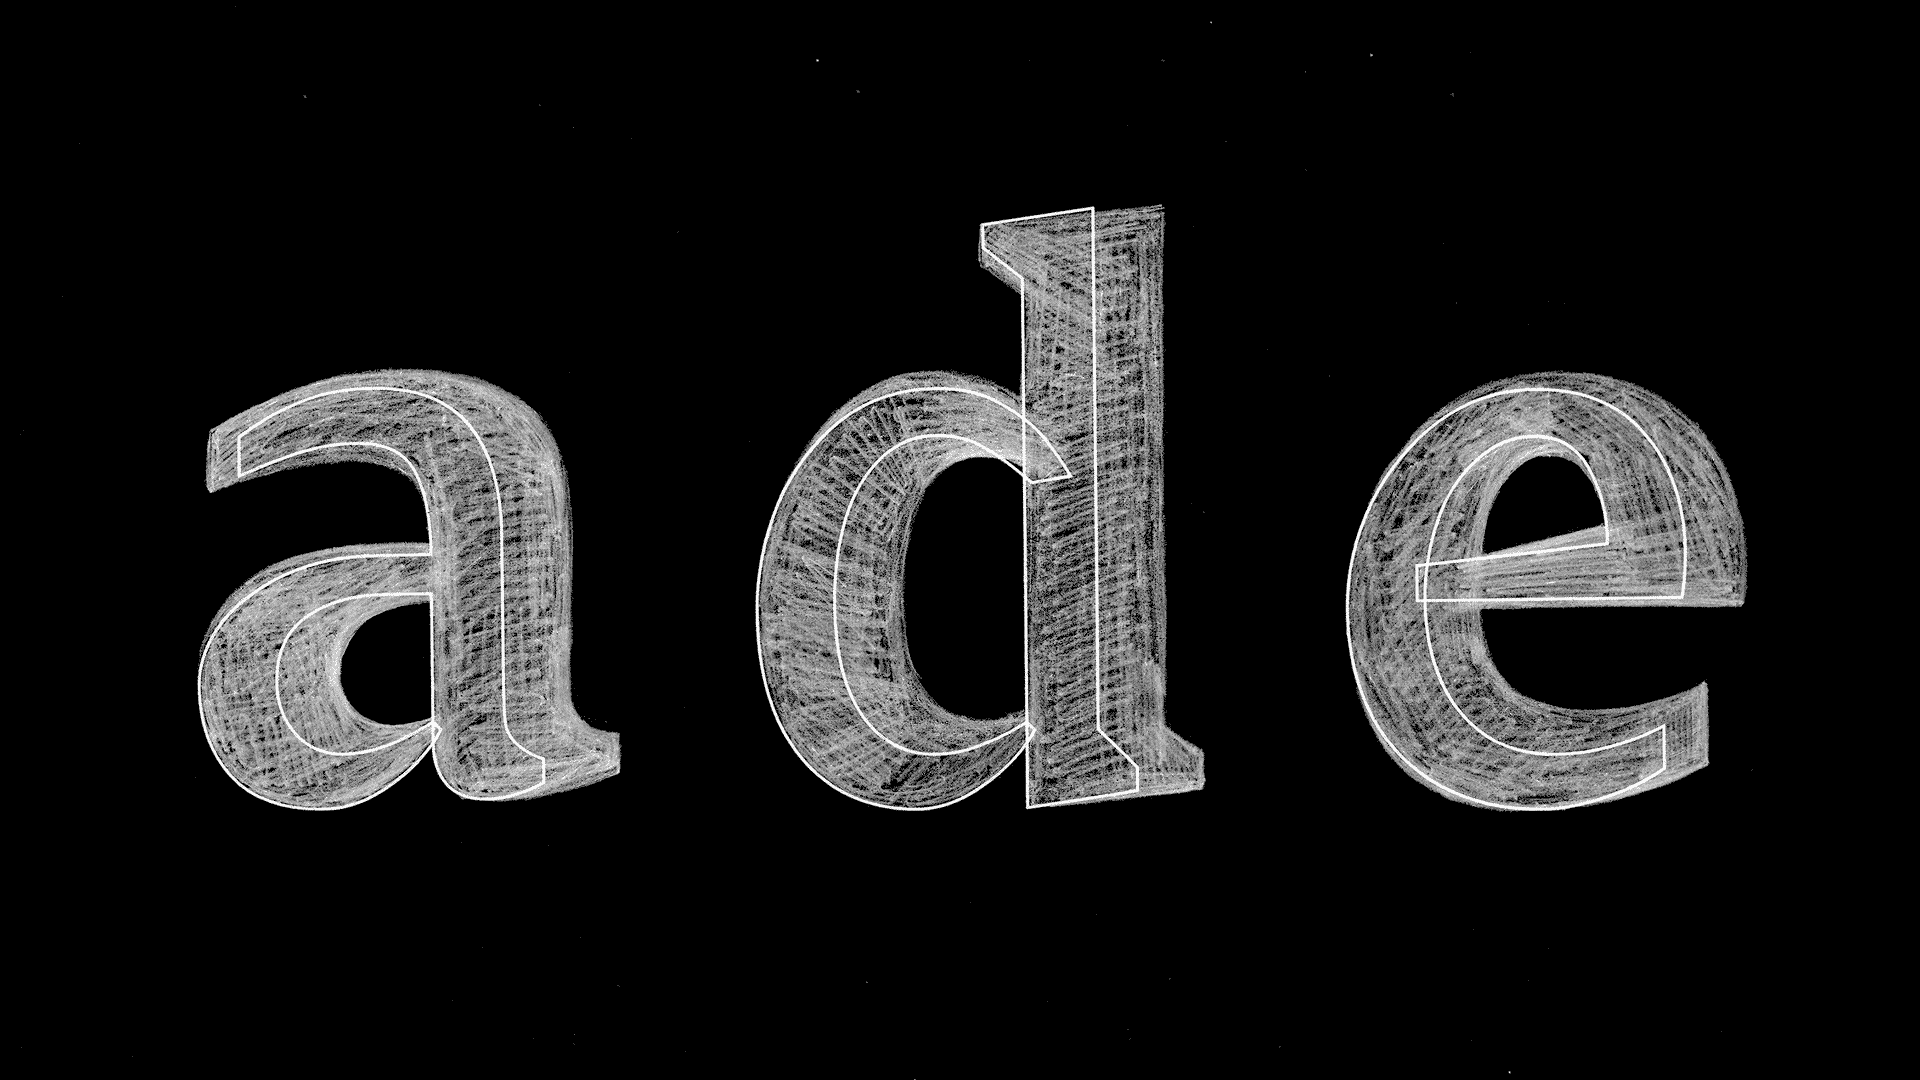 Gallery Justified text on the web dorn bold letter sketches for a, d and e